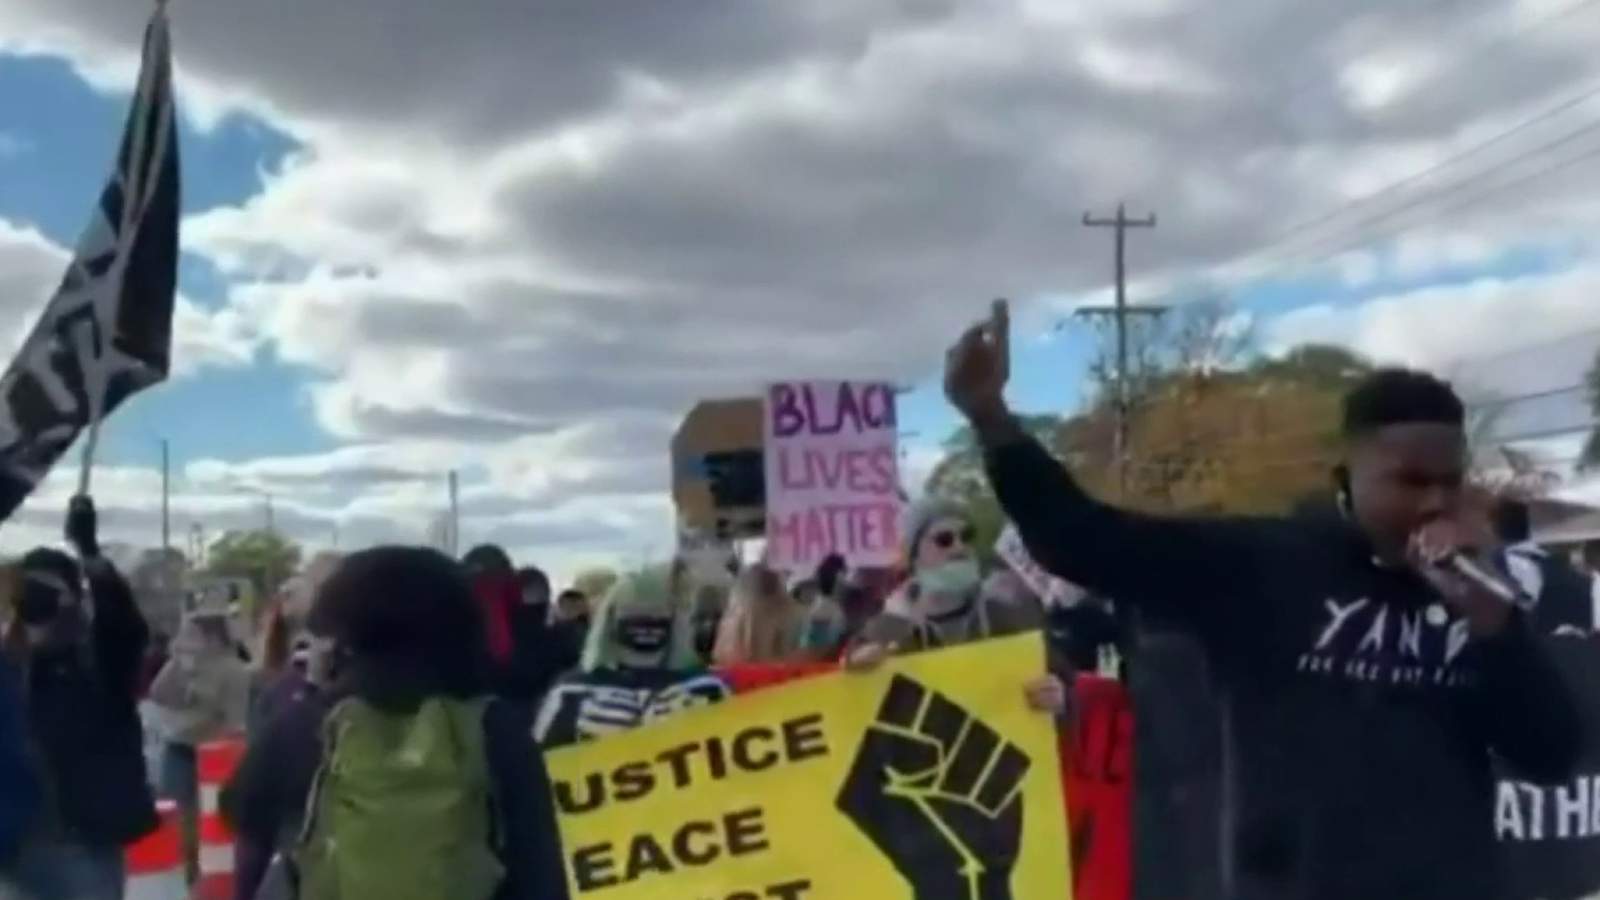 Shelby Township police arrest several people in protest march against racism, police brutality